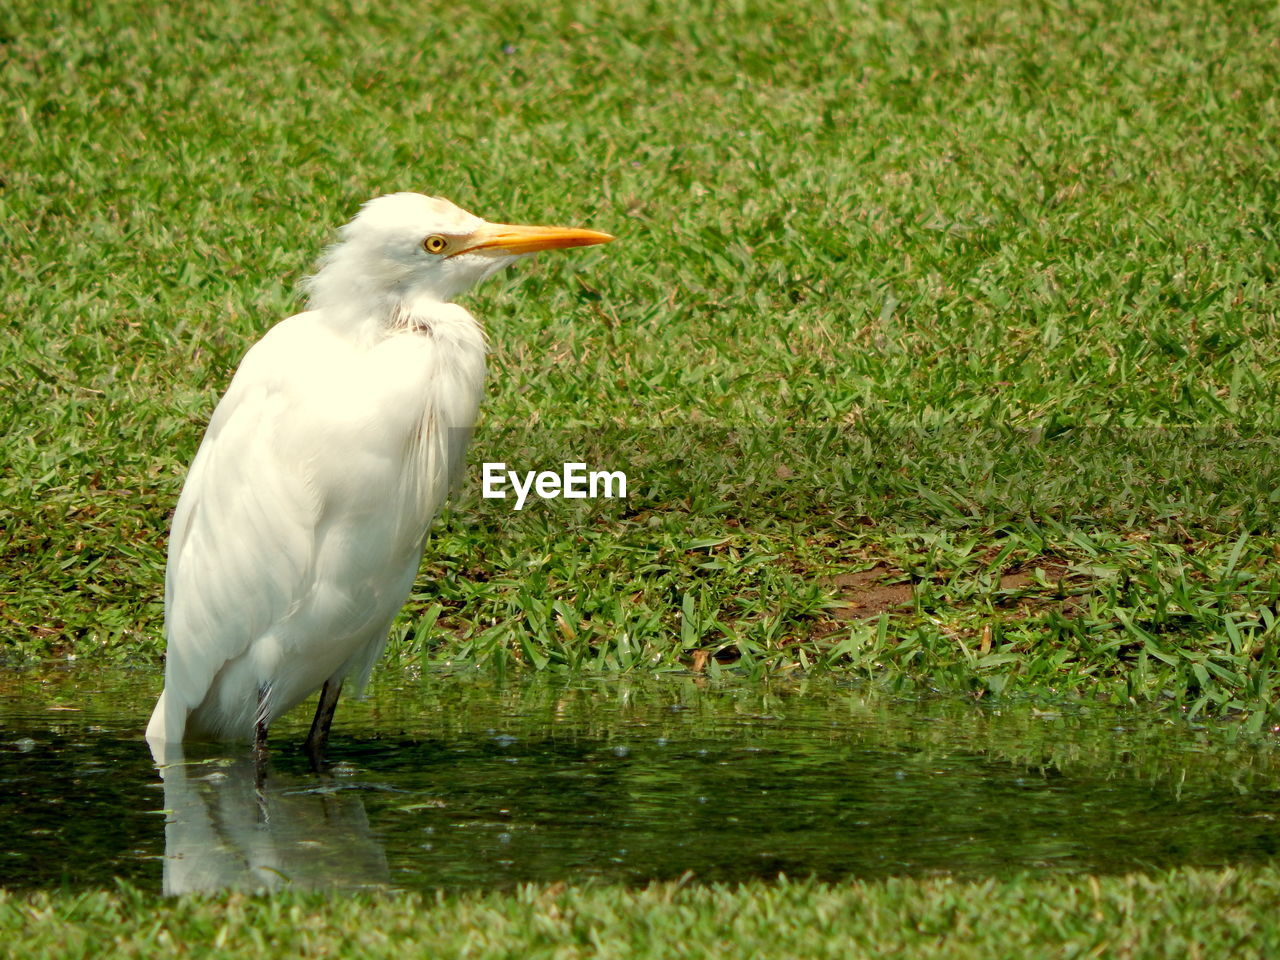 CLOSE-UP OF HERON ON GRASS